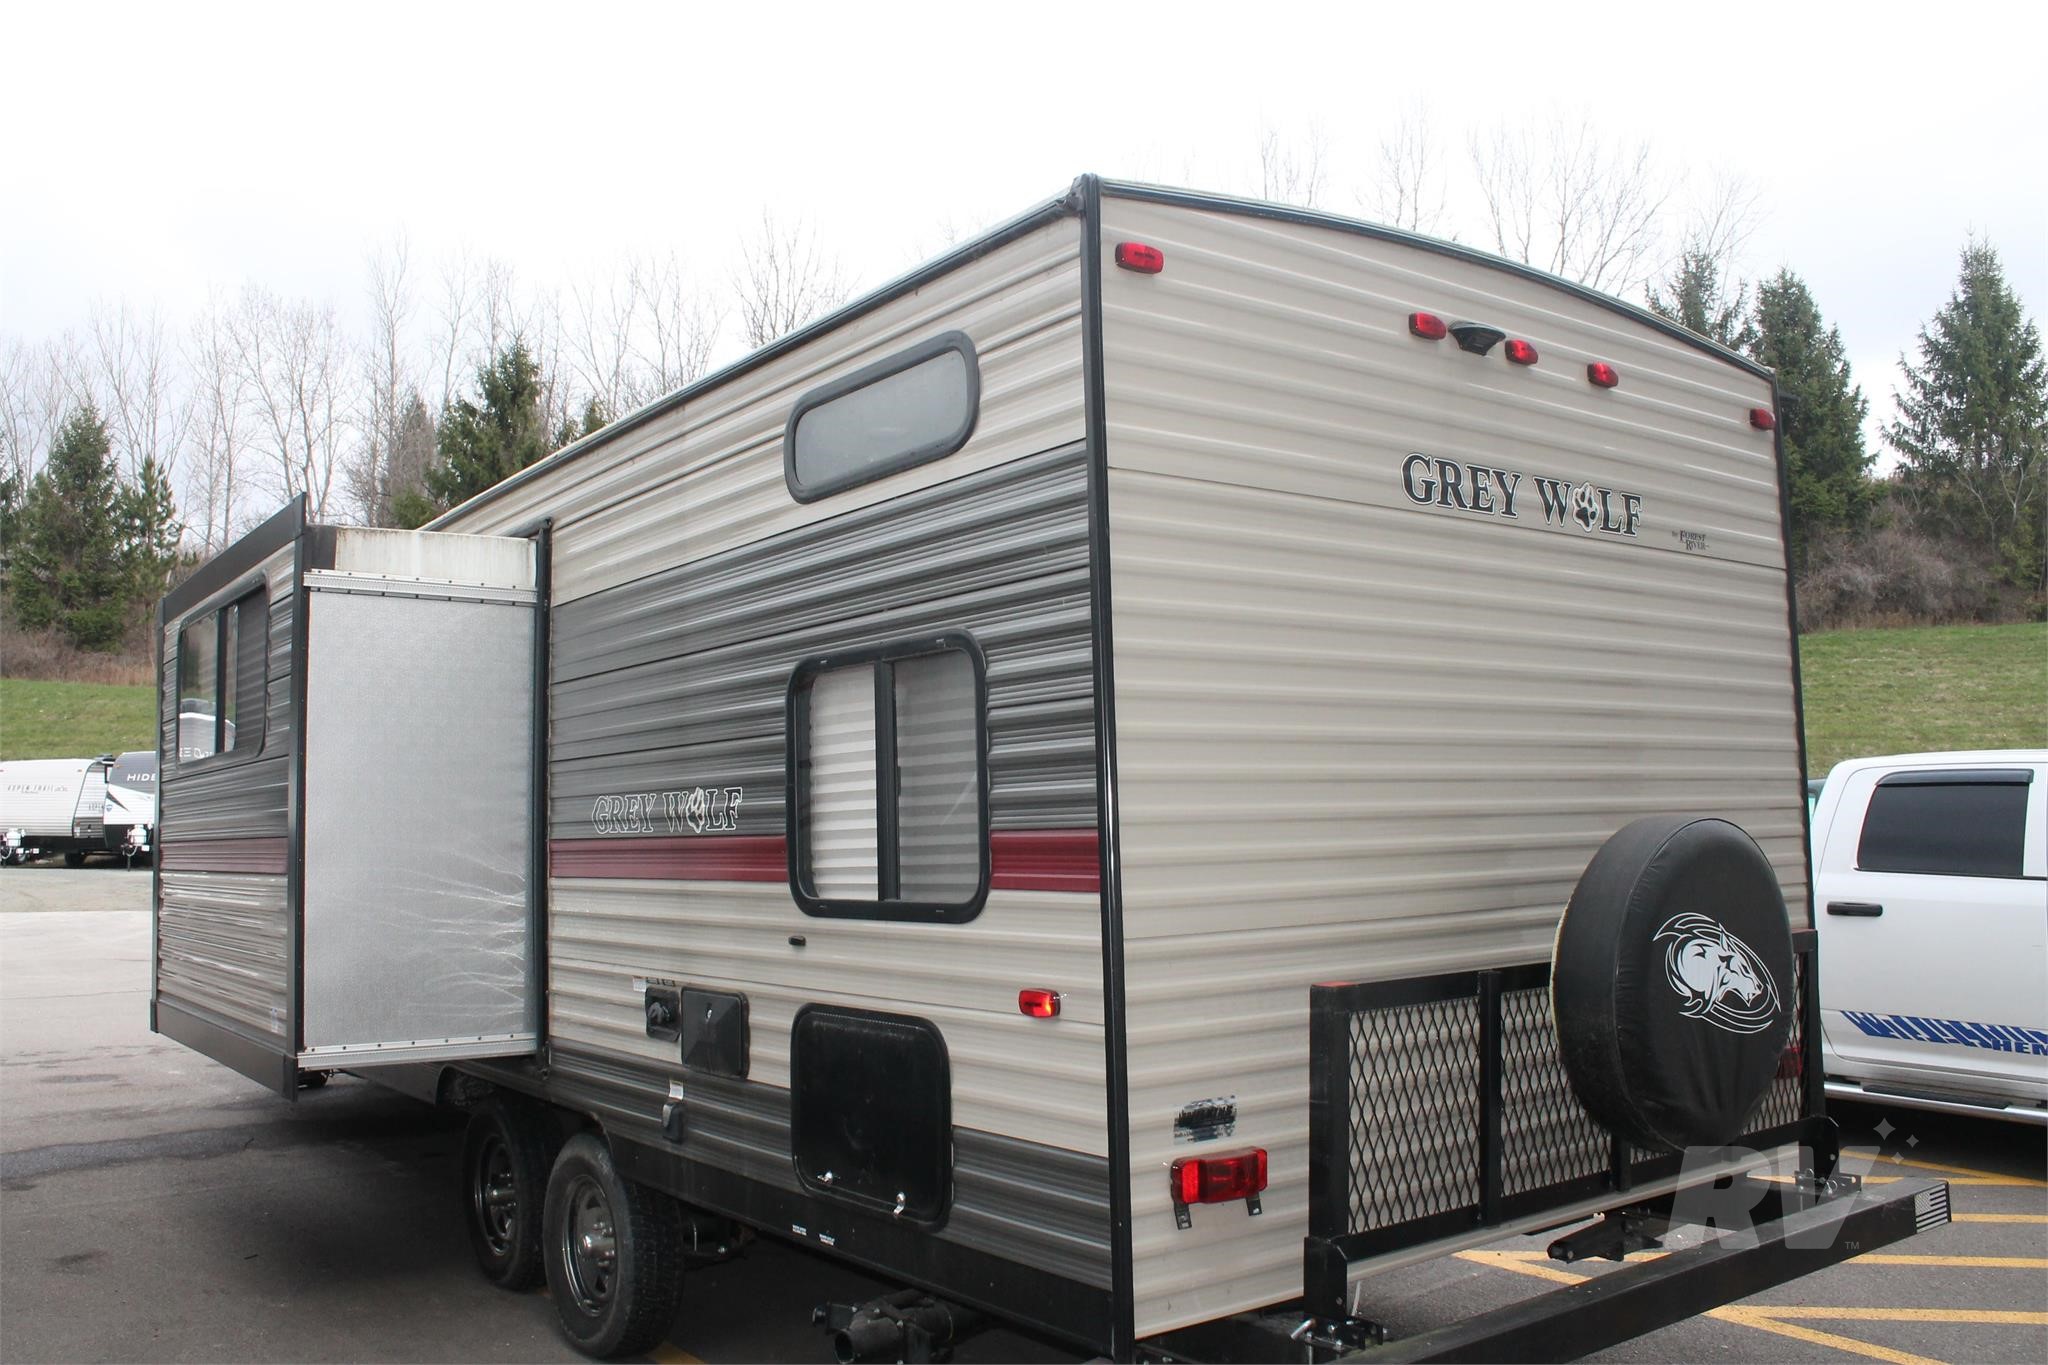 2018 FOREST RIVER CHEROKEE GREY WOLF 23DBH For Sale in Farmington, New York | RVUniverse.com 2018 Forest River Cherokee Grey Wolf 23dbh